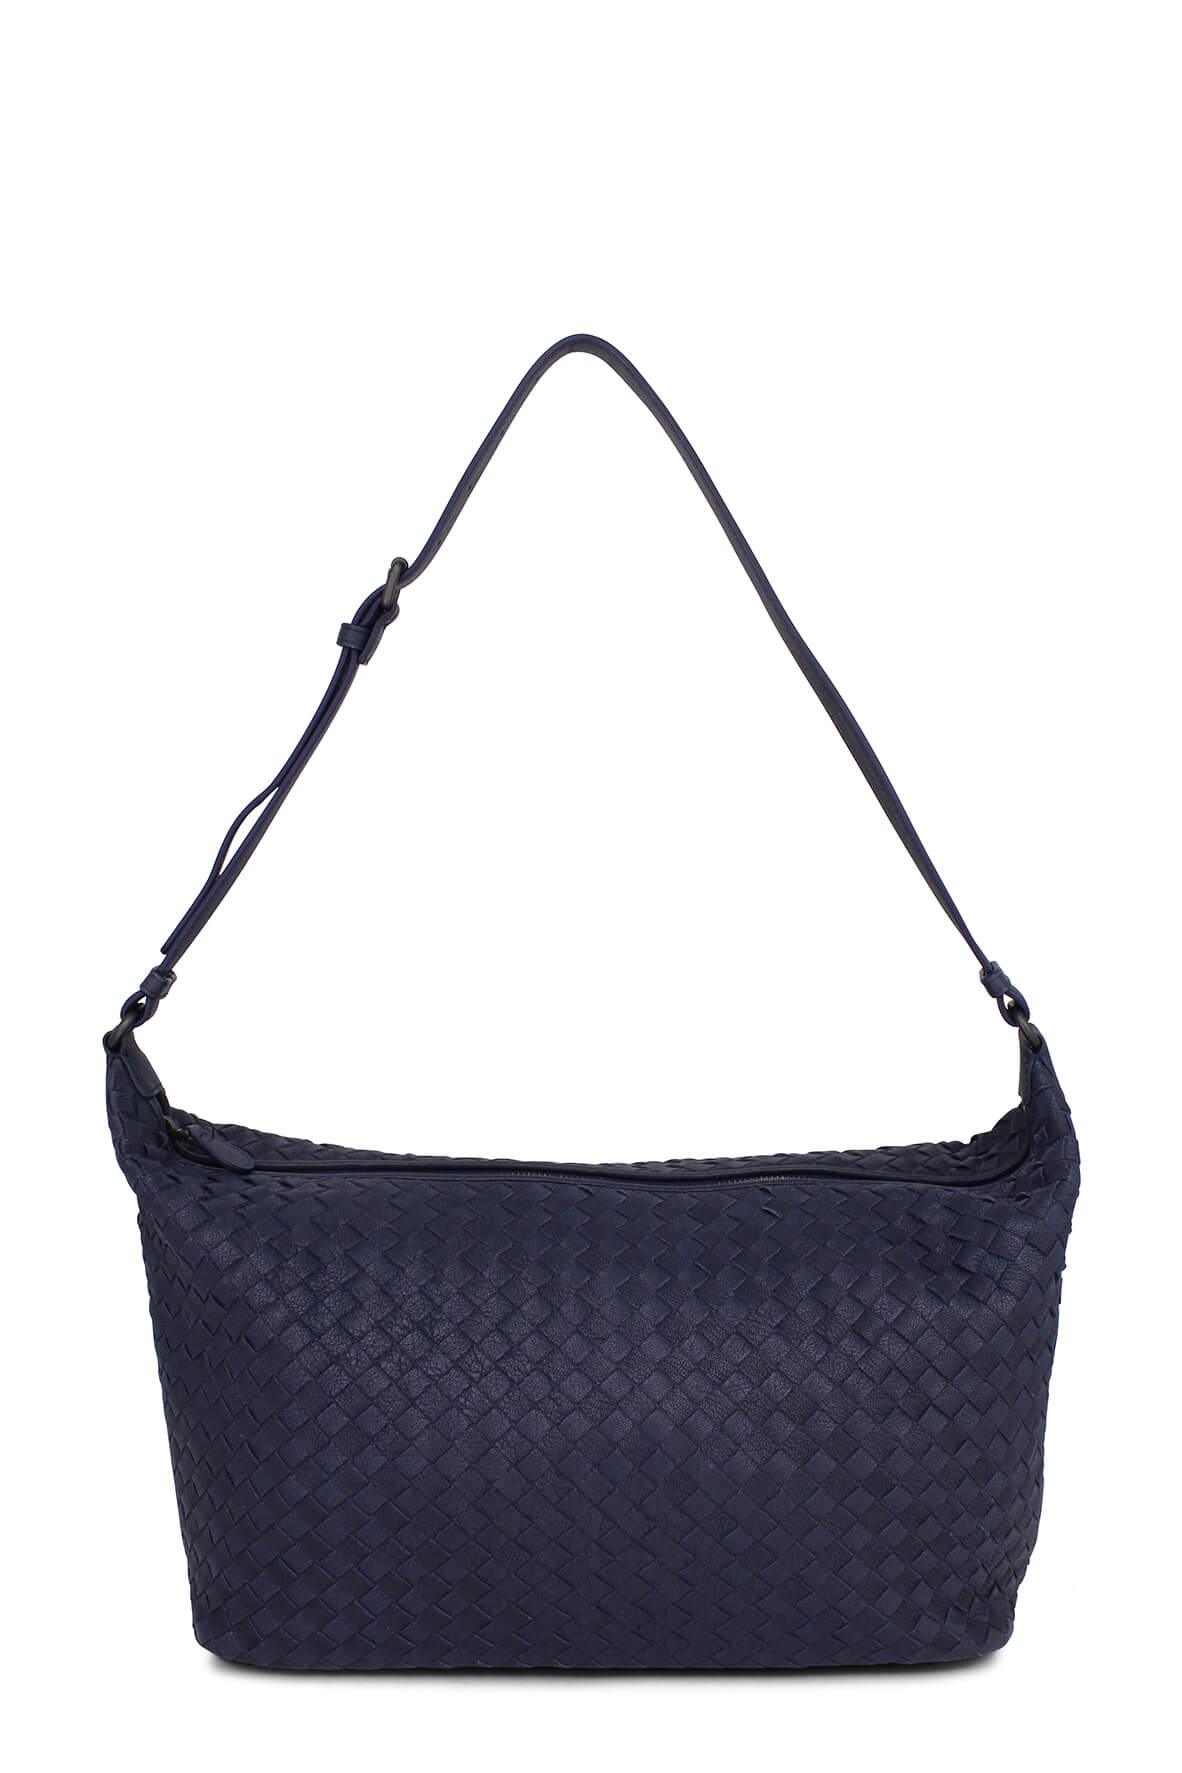 Large Intrecciato Hobo Cobalt Blue – Style Theory SG